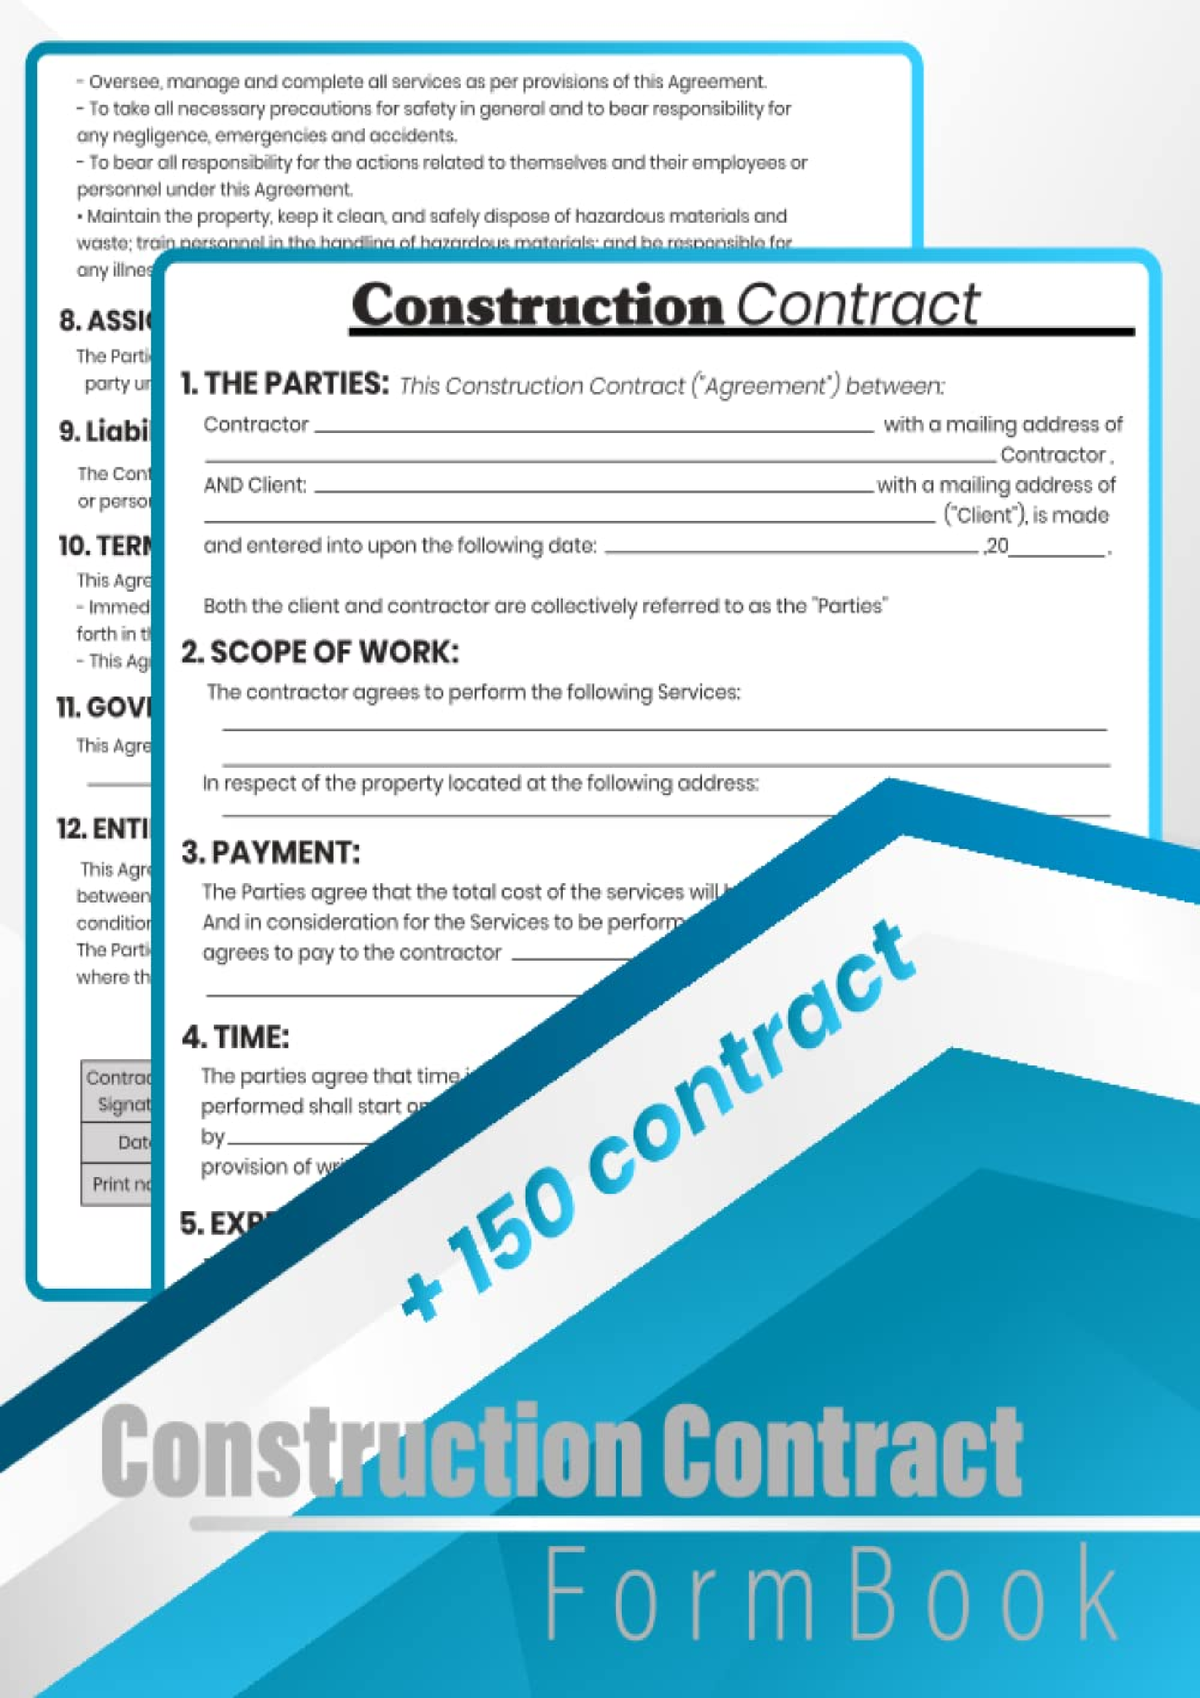 Full DOWNLOAD Construction Contract Forms Book: Business Contract